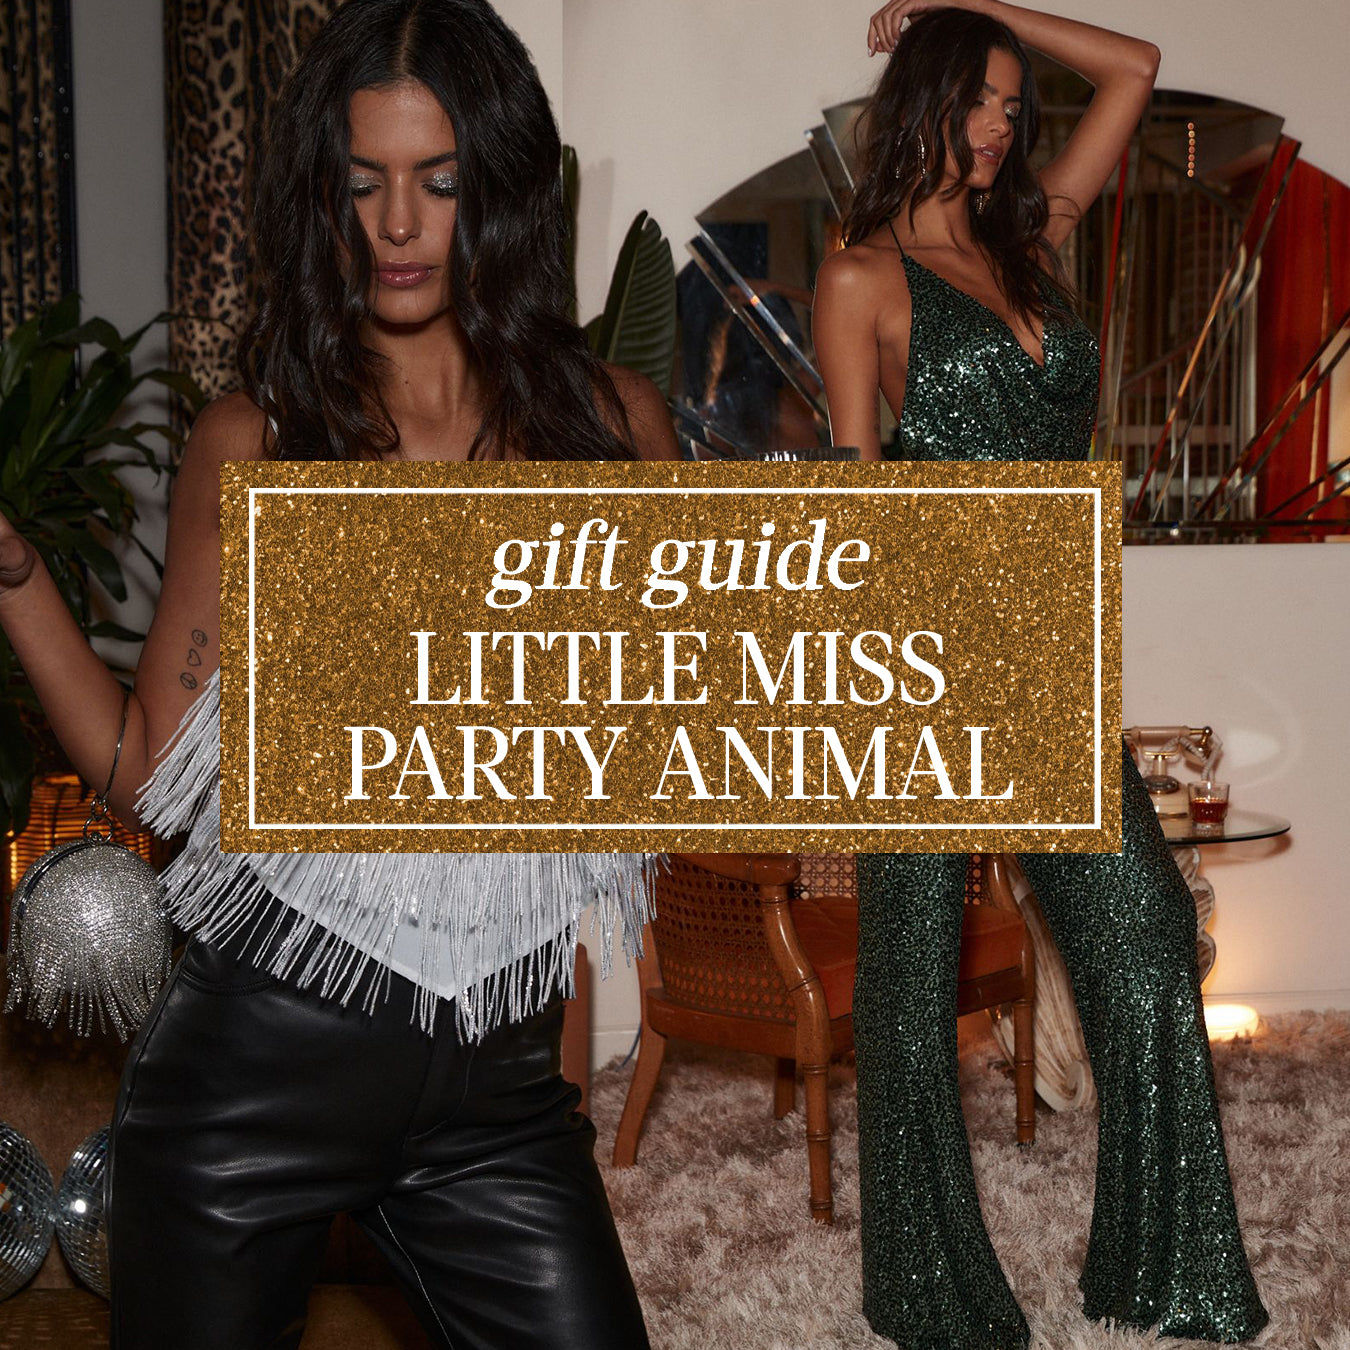 Gift Guide: Little Miss Cozy – 12th Tribe